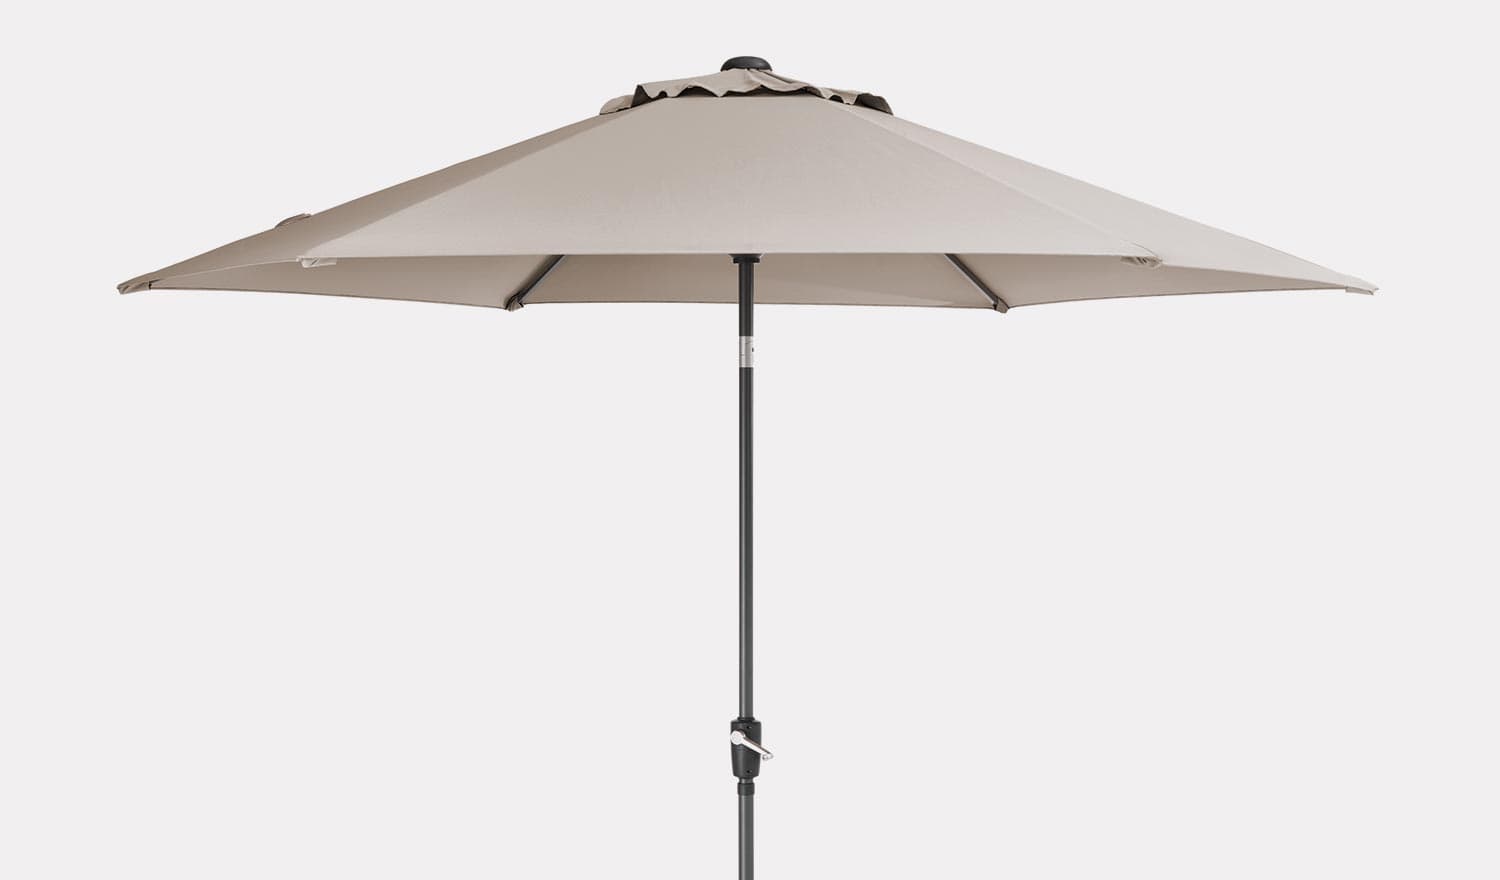 Azuma Garden Parasol 3M Round Taupe 8 Panel Crank & Tilt Function Patio Umbrella Sun Shade With UV50 Protection Adjustable Canopy Air Vented For Stability Aluminium Pole Summer Dining Accessory